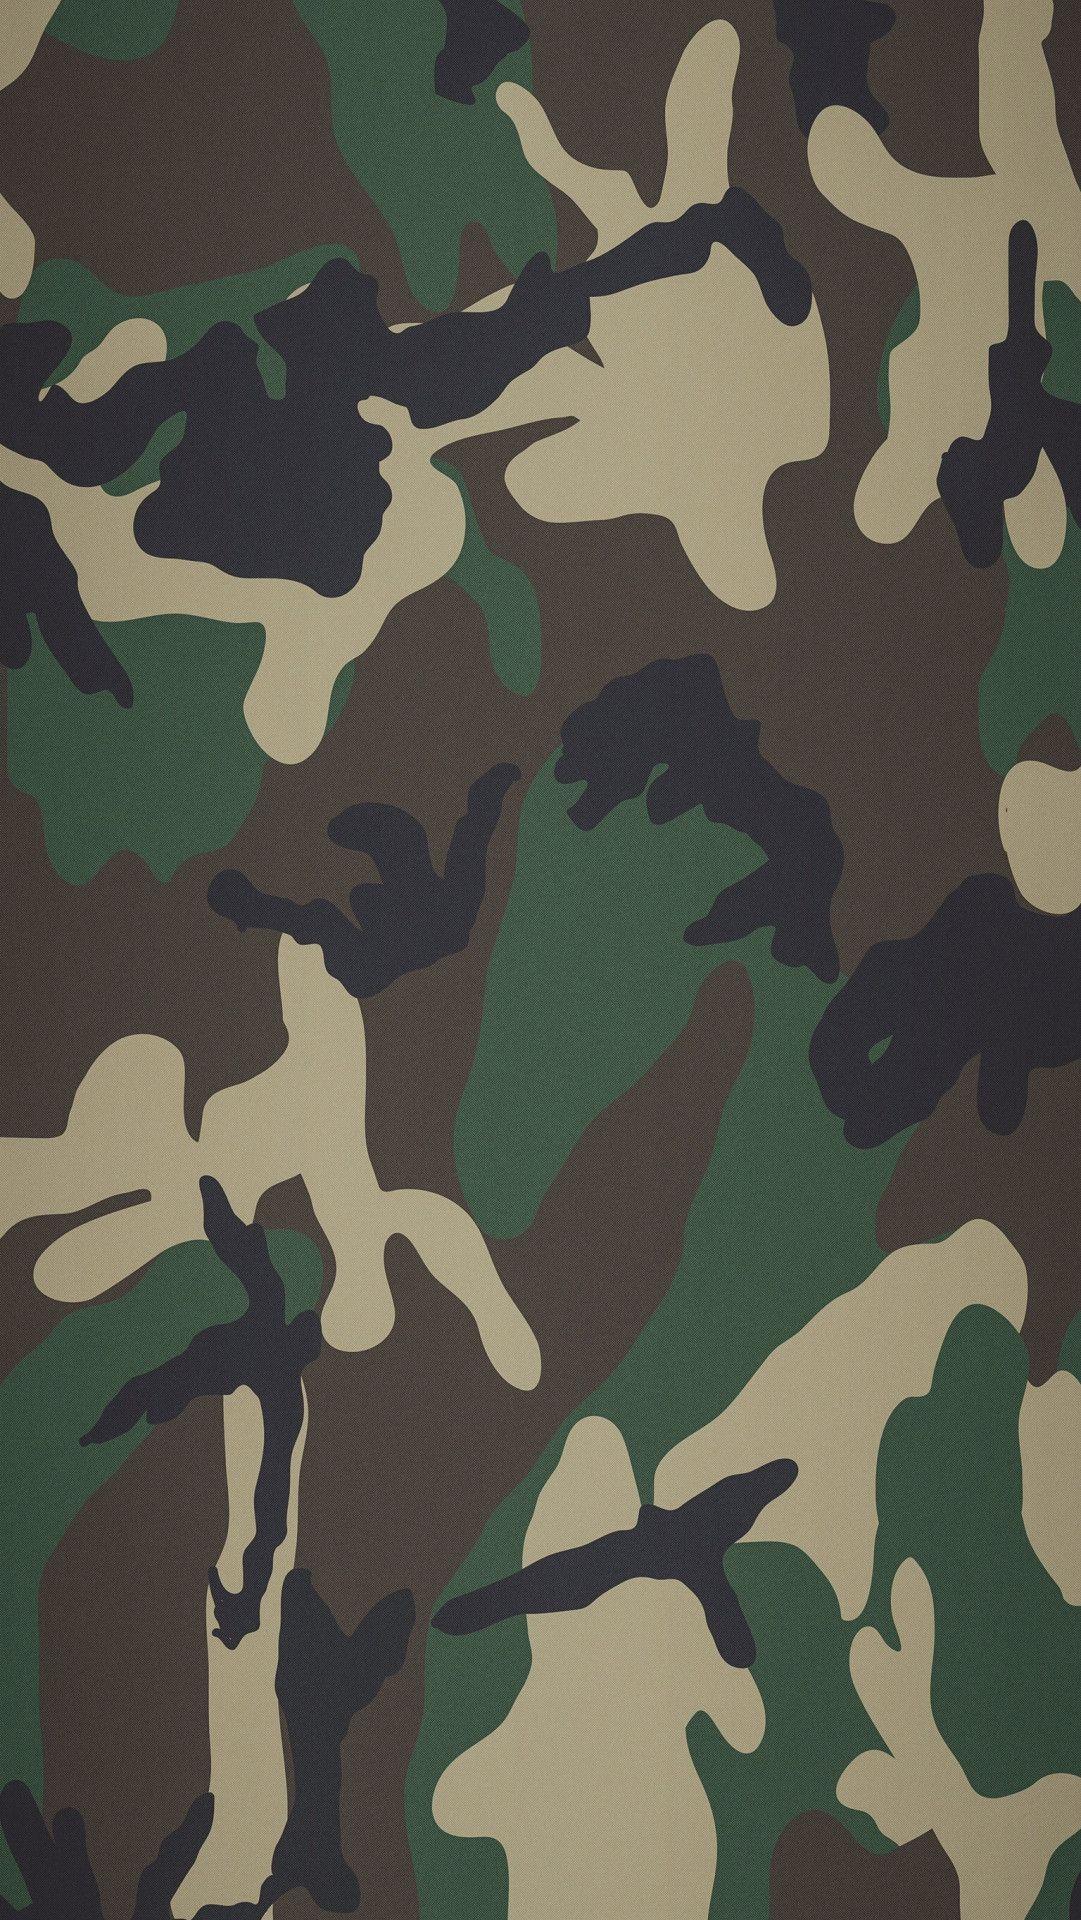 Tải xuống APK Camouflage wallpaper hd full cho Android